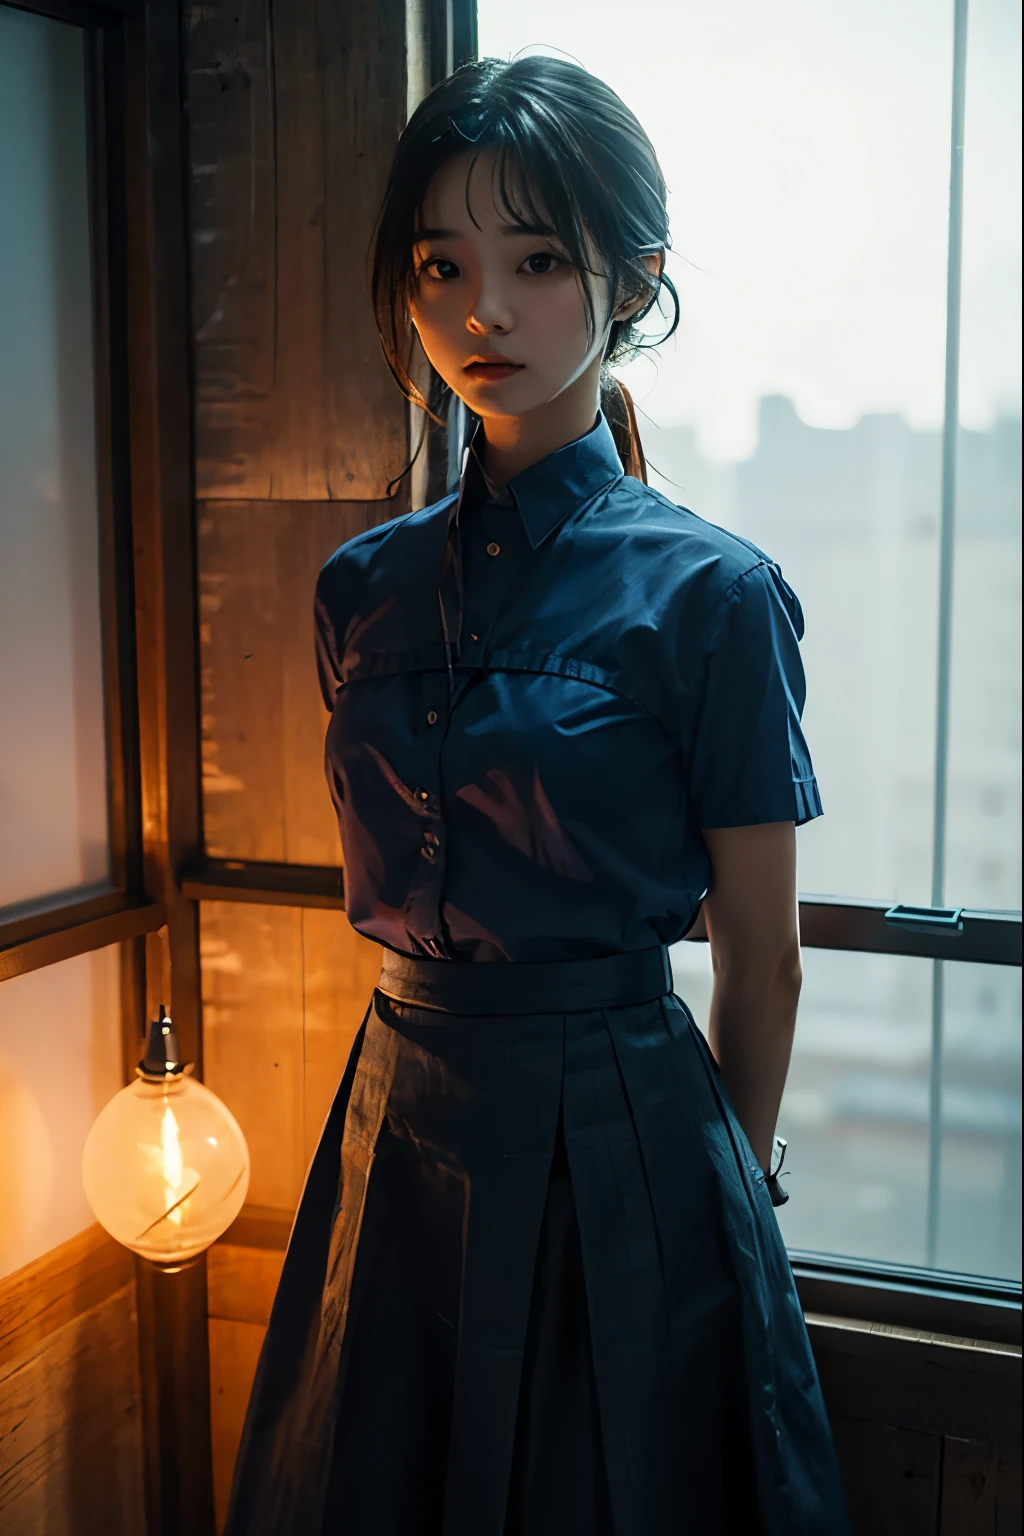 A cute girl is confined and tied up、A room with the lights on at night、Blue semi-long skirt、Red short sleeve shirt、Are standing、Beauty、Age 25、Medium build、Outside the window is night、Like real life、highest quality、